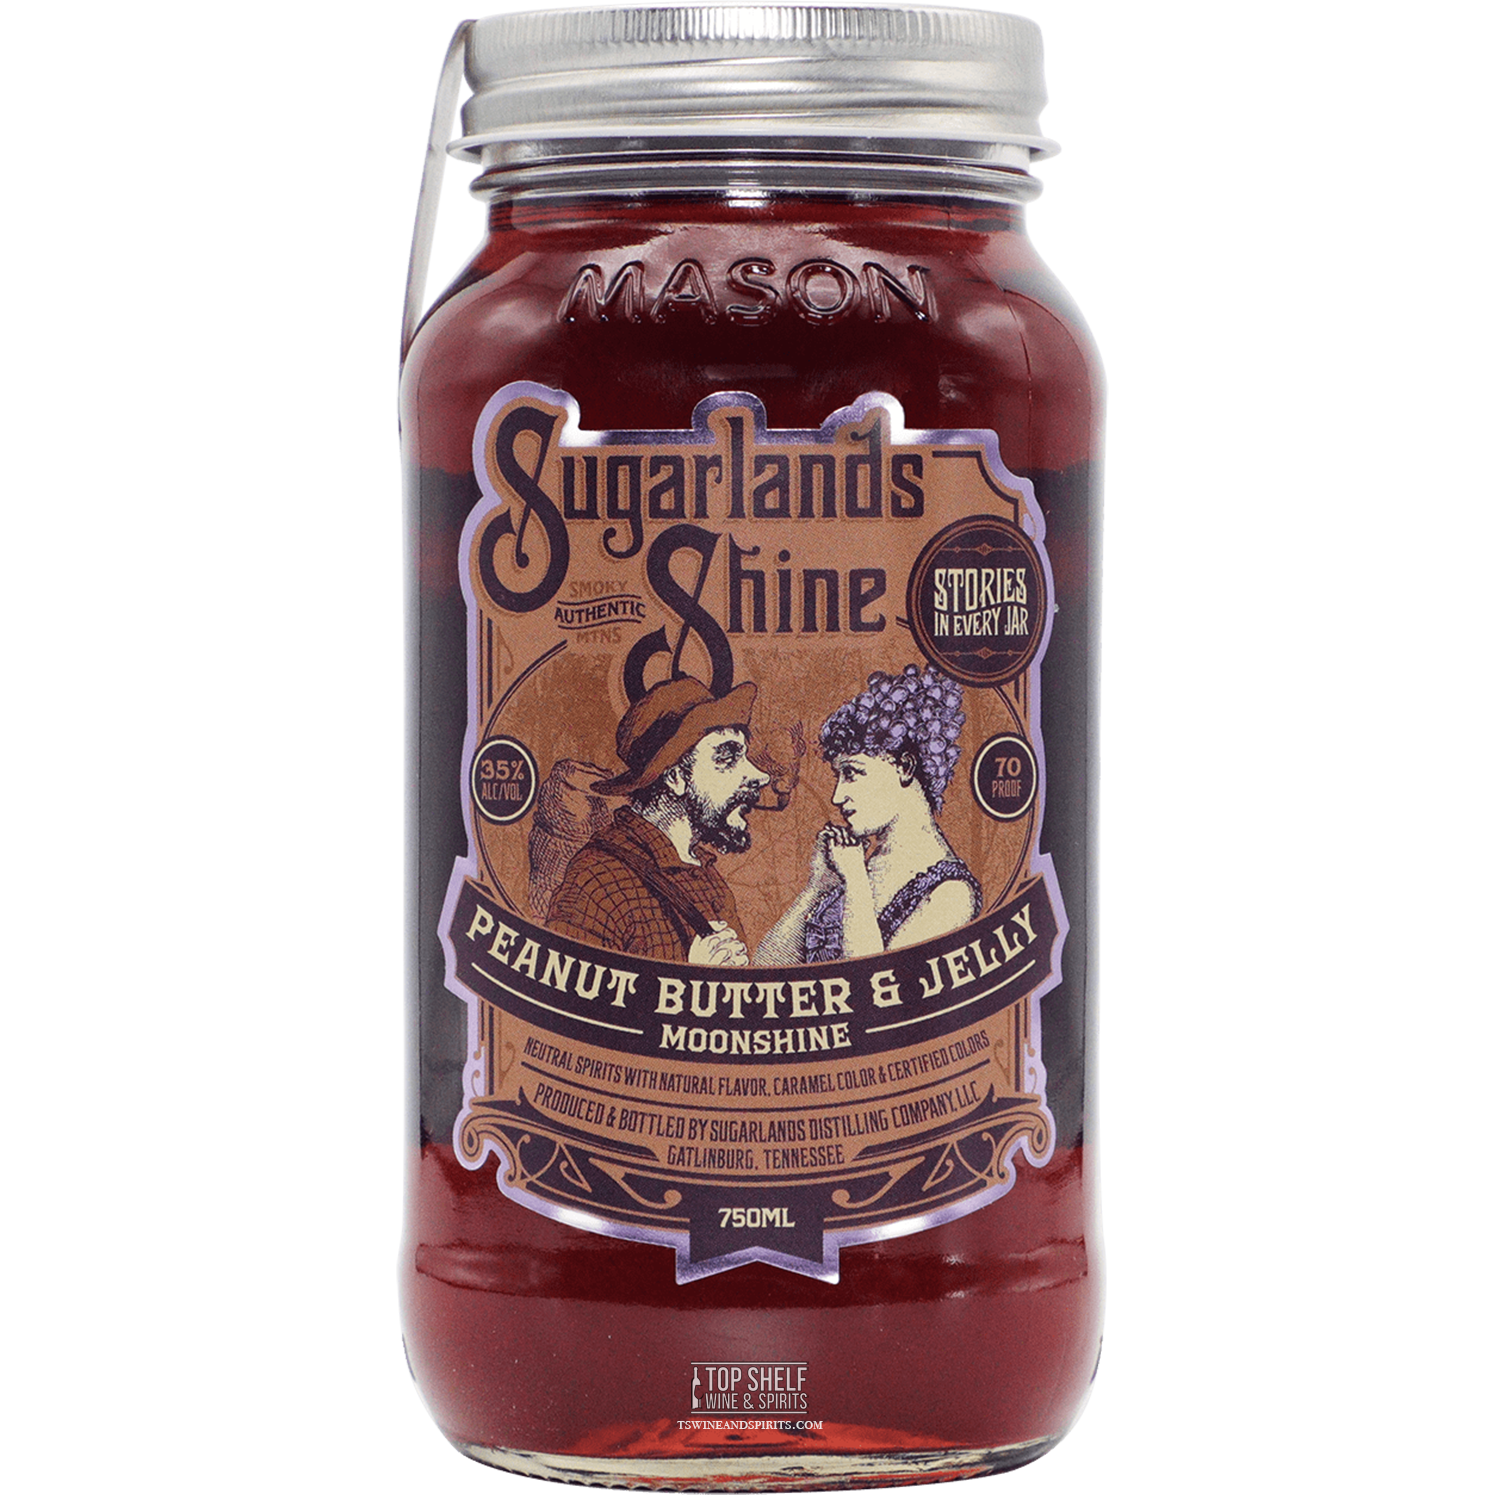 Sugarlands Shine Peanut Butter and Jelly Moonshine